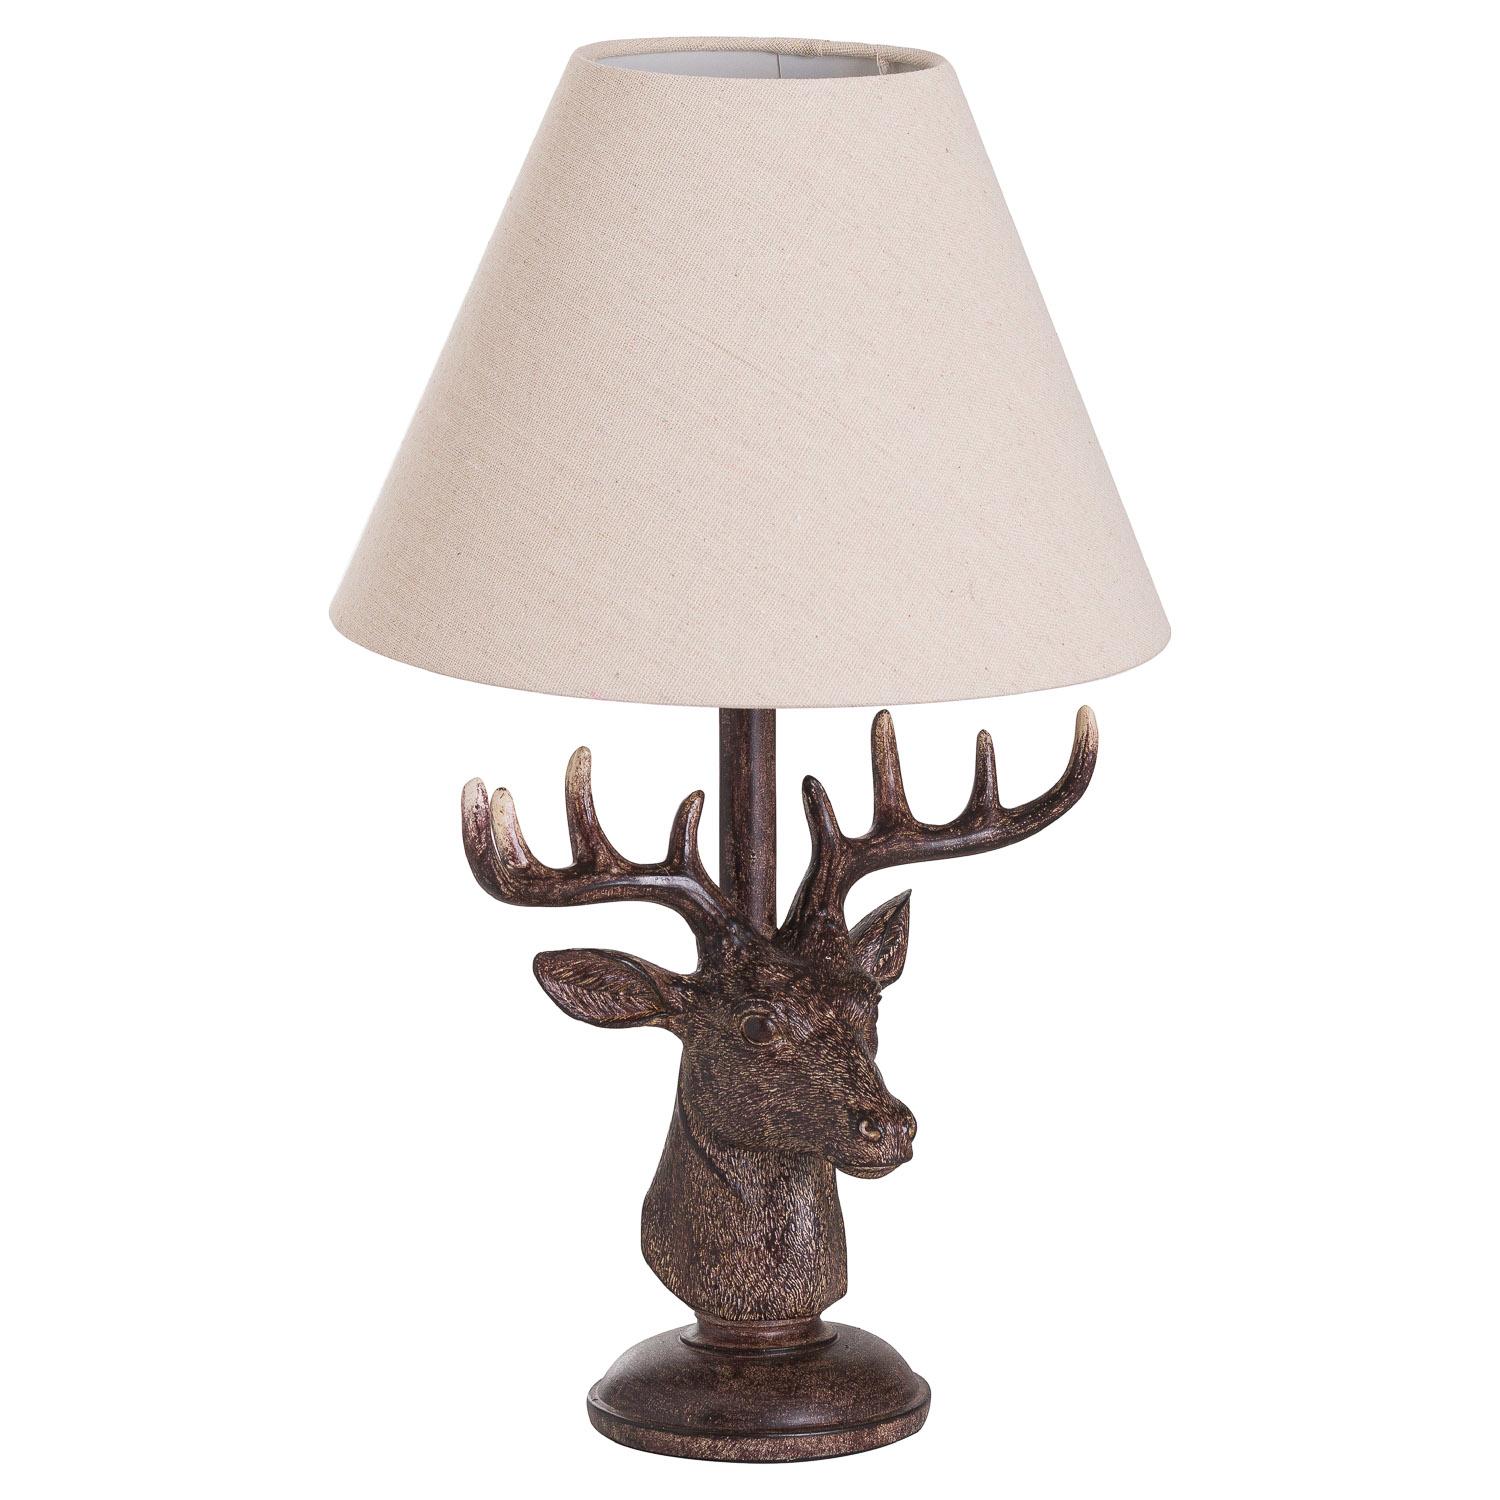 Rustic table lamp with a resin stag head base and a neutral linen shade.